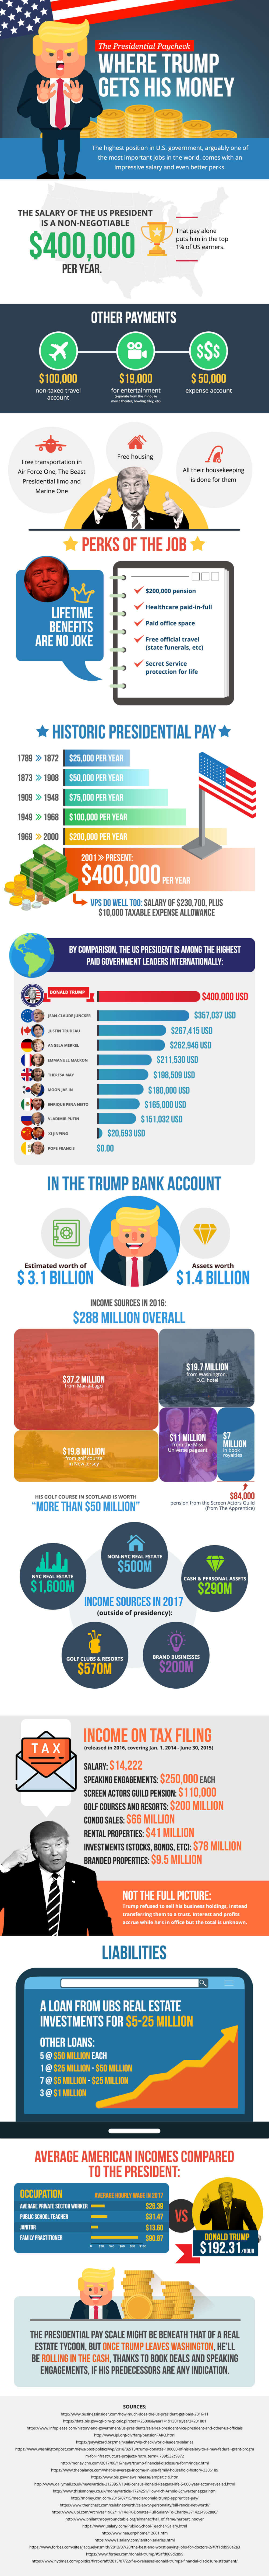 The Presidential Paycheck - Where Trump Gets His Money